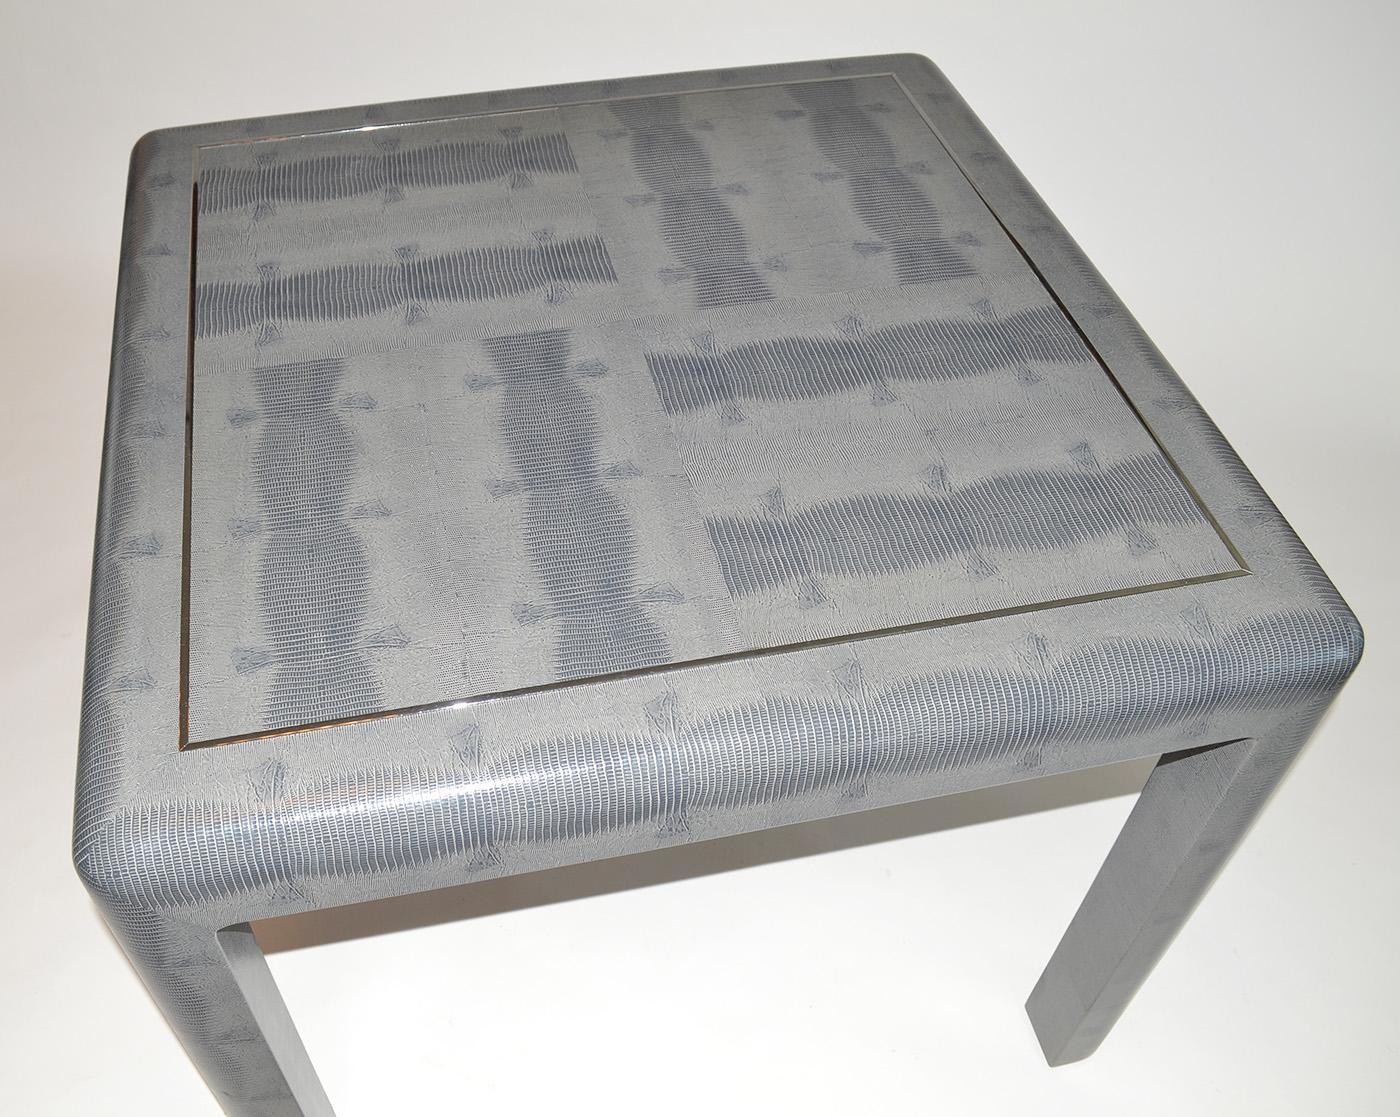 Game table in lizard skin by Karl Springer, 1980's, signed. Embossed leather covered lizard skin and chrome parsons-style game table with leather Karl Springer tag.
     